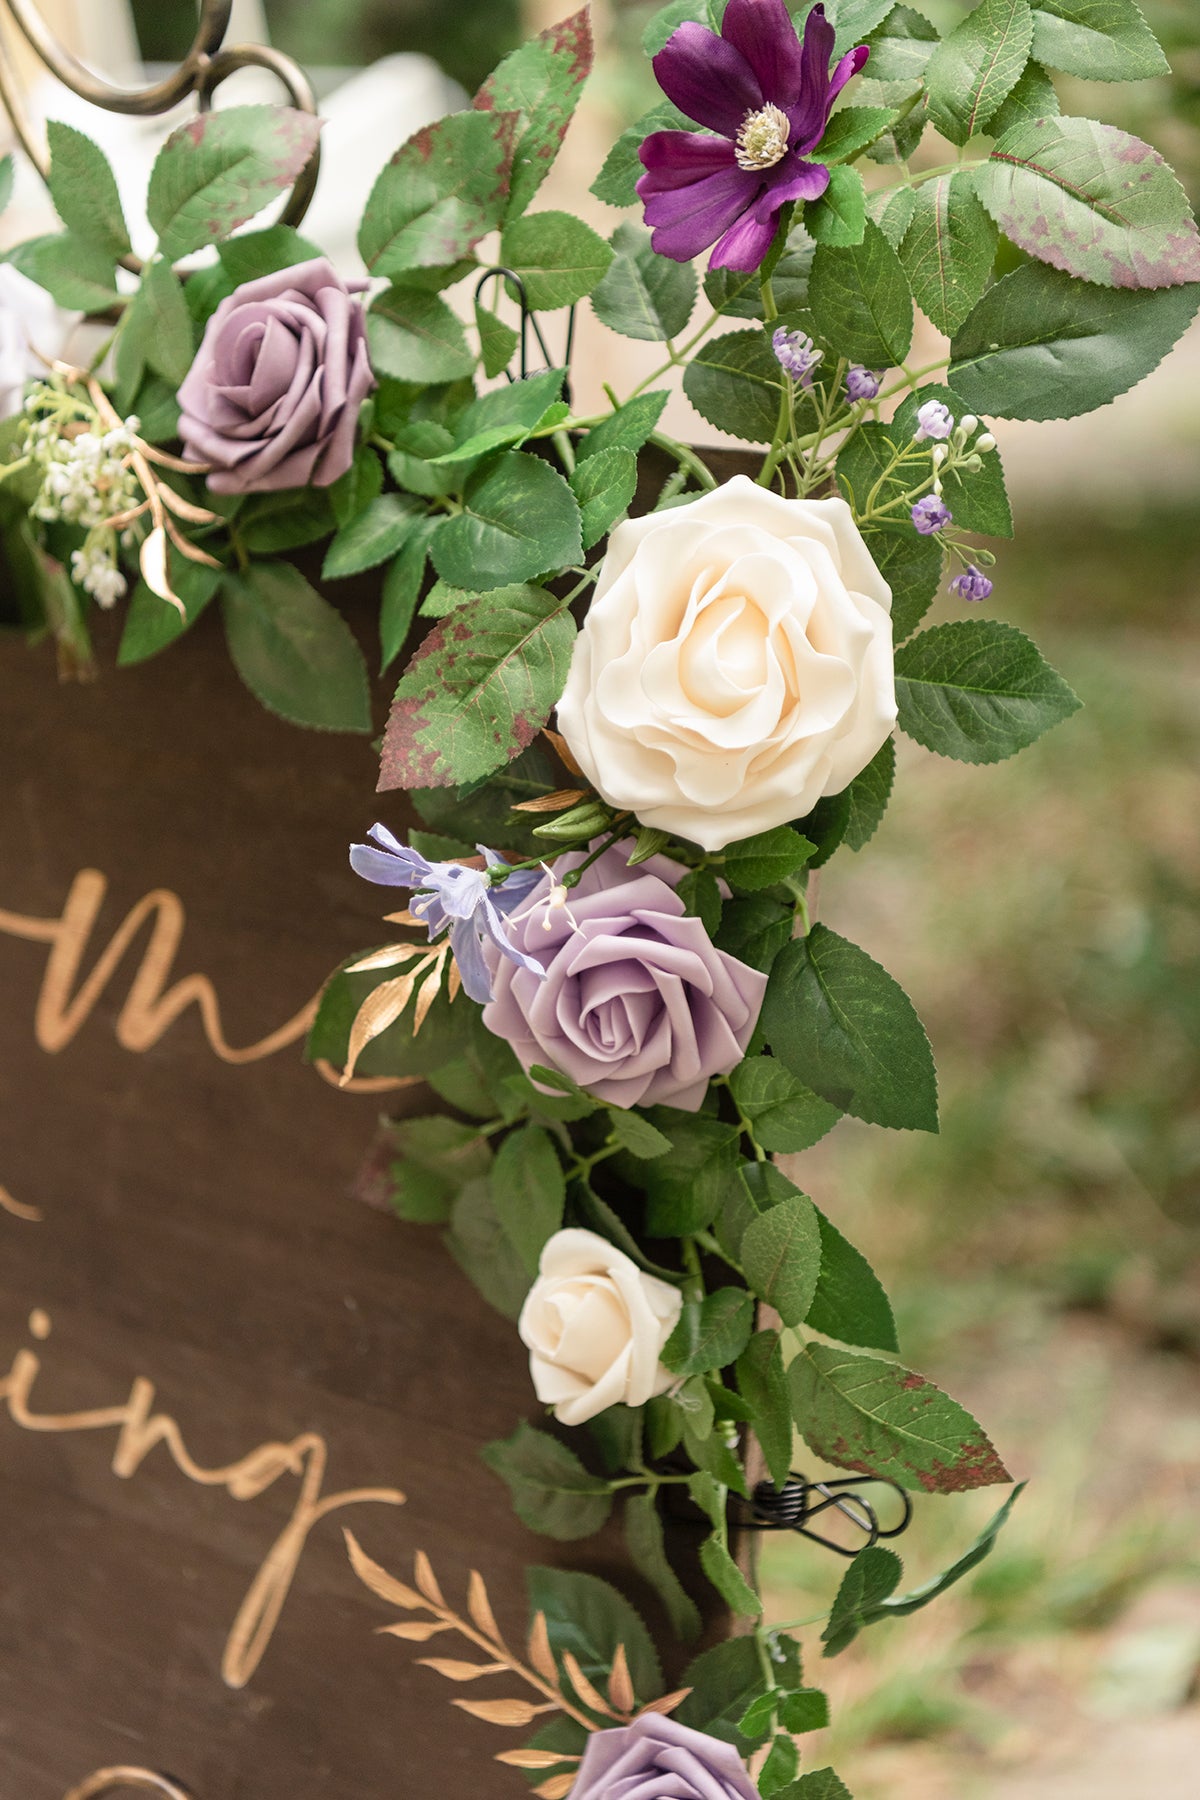 5ft Flower Garland in Lilac & Gold